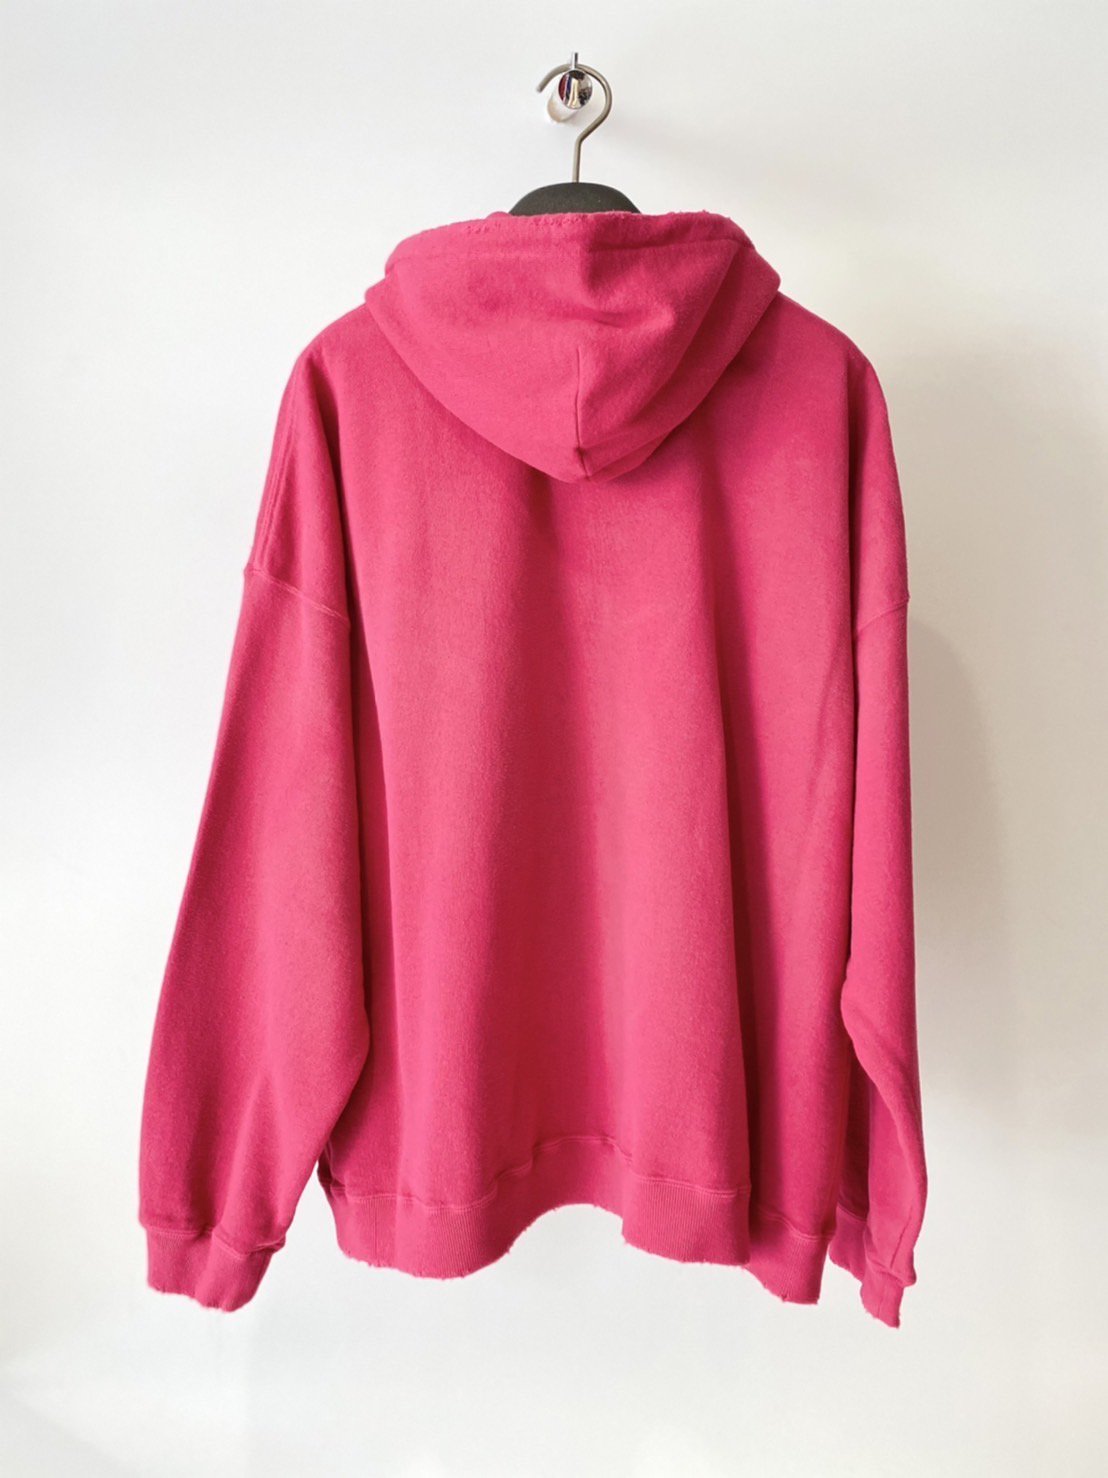 DAIRIKU<br />Water-repellent Zip Up Hoodie / Vintage Pink<img class='new_mark_img2' src='https://img.shop-pro.jp/img/new/icons14.gif' style='border:none;display:inline;margin:0px;padding:0px;width:auto;' />